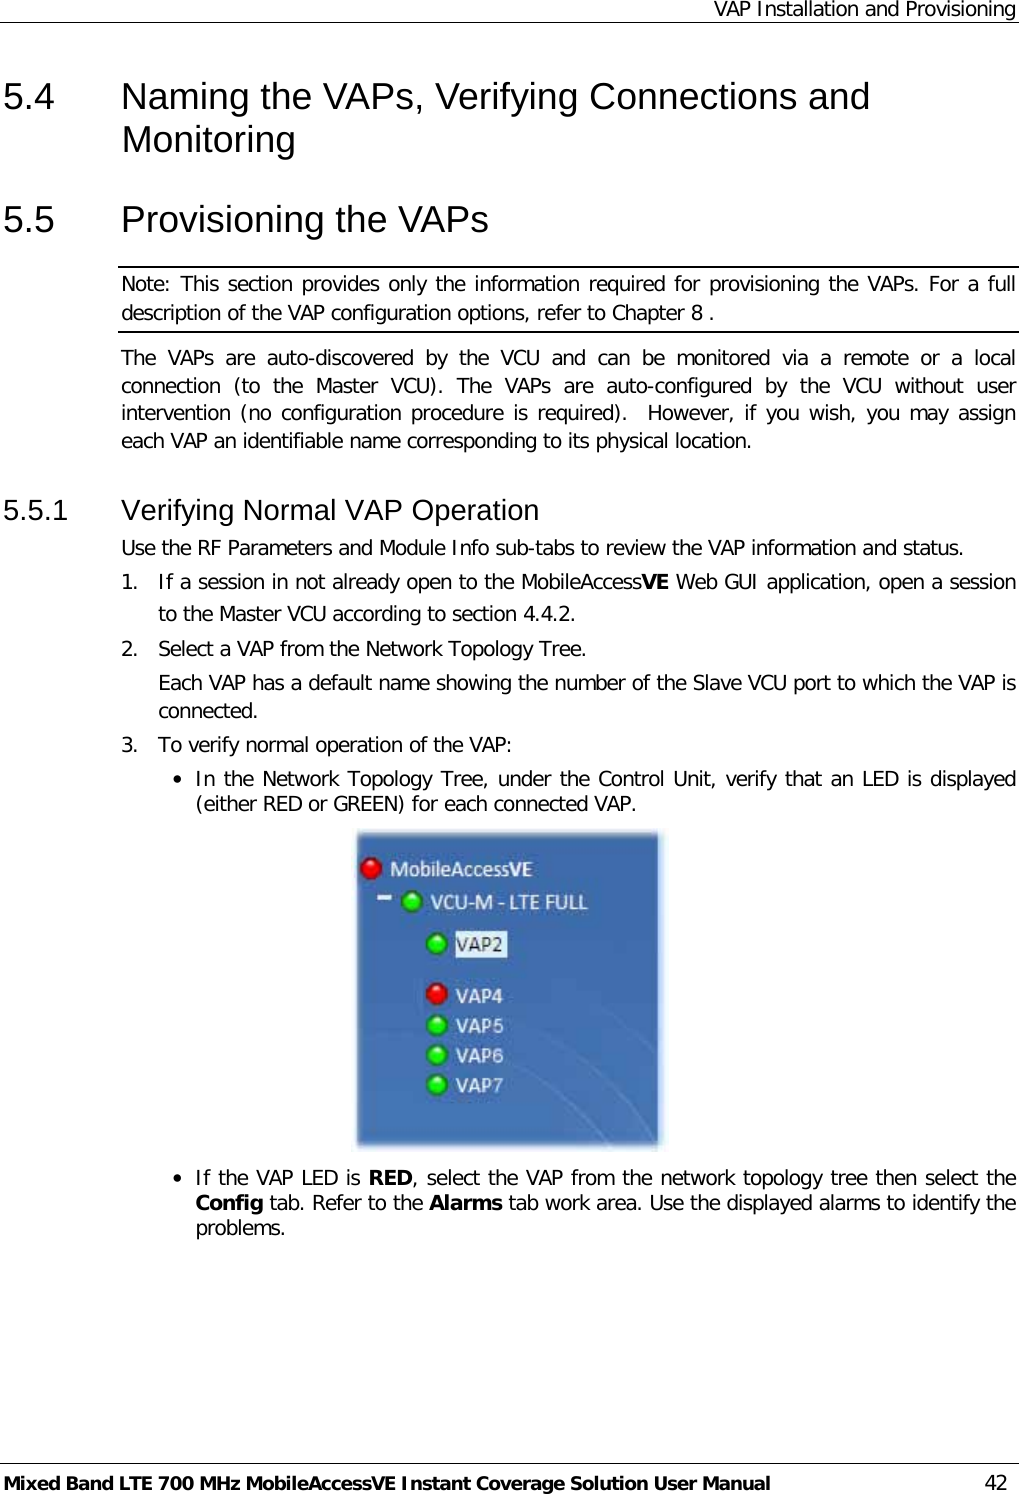 VAP Installation and Provisioning Mixed Band LTE 700 MHz MobileAccessVE Instant Coverage Solution User Manual  42 5.4  Naming the VAPs, Verifying Connections and Monitoring 5.5  Provisioning the VAPs Note: This section provides only the information required for provisioning the VAPs. For a full description of the VAP configuration options, refer to Chapter  8 . The  VAPs  are auto-discovered by the VCU  and can be monitored via a  remote or a local connection  (to the Master VCU).  The  VAPs  are auto-configured by the VCU without user intervention (no configuration procedure is required).  However, if you wish, you may assign each VAP an identifiable name corresponding to its physical location.  5.5.1  Verifying Normal VAP Operation Use the RF Parameters and Module Info sub-tabs to review the VAP information and status.   1.  If a session in not already open to the MobileAccessVE Web GUI application, open a session to the Master VCU according to section  4.4.2. 2.  Select a VAP from the Network Topology Tree.   Each VAP has a default name showing the number of the Slave VCU port to which the VAP is connected. 3.  To verify normal operation of the VAP: • In the Network Topology Tree, under the Control Unit, verify that an LED is displayed (either RED or GREEN) for each connected VAP.   • If the VAP LED is RED, select the VAP from the network topology tree then select the Config tab. Refer to the Alarms tab work area. Use the displayed alarms to identify the problems.  